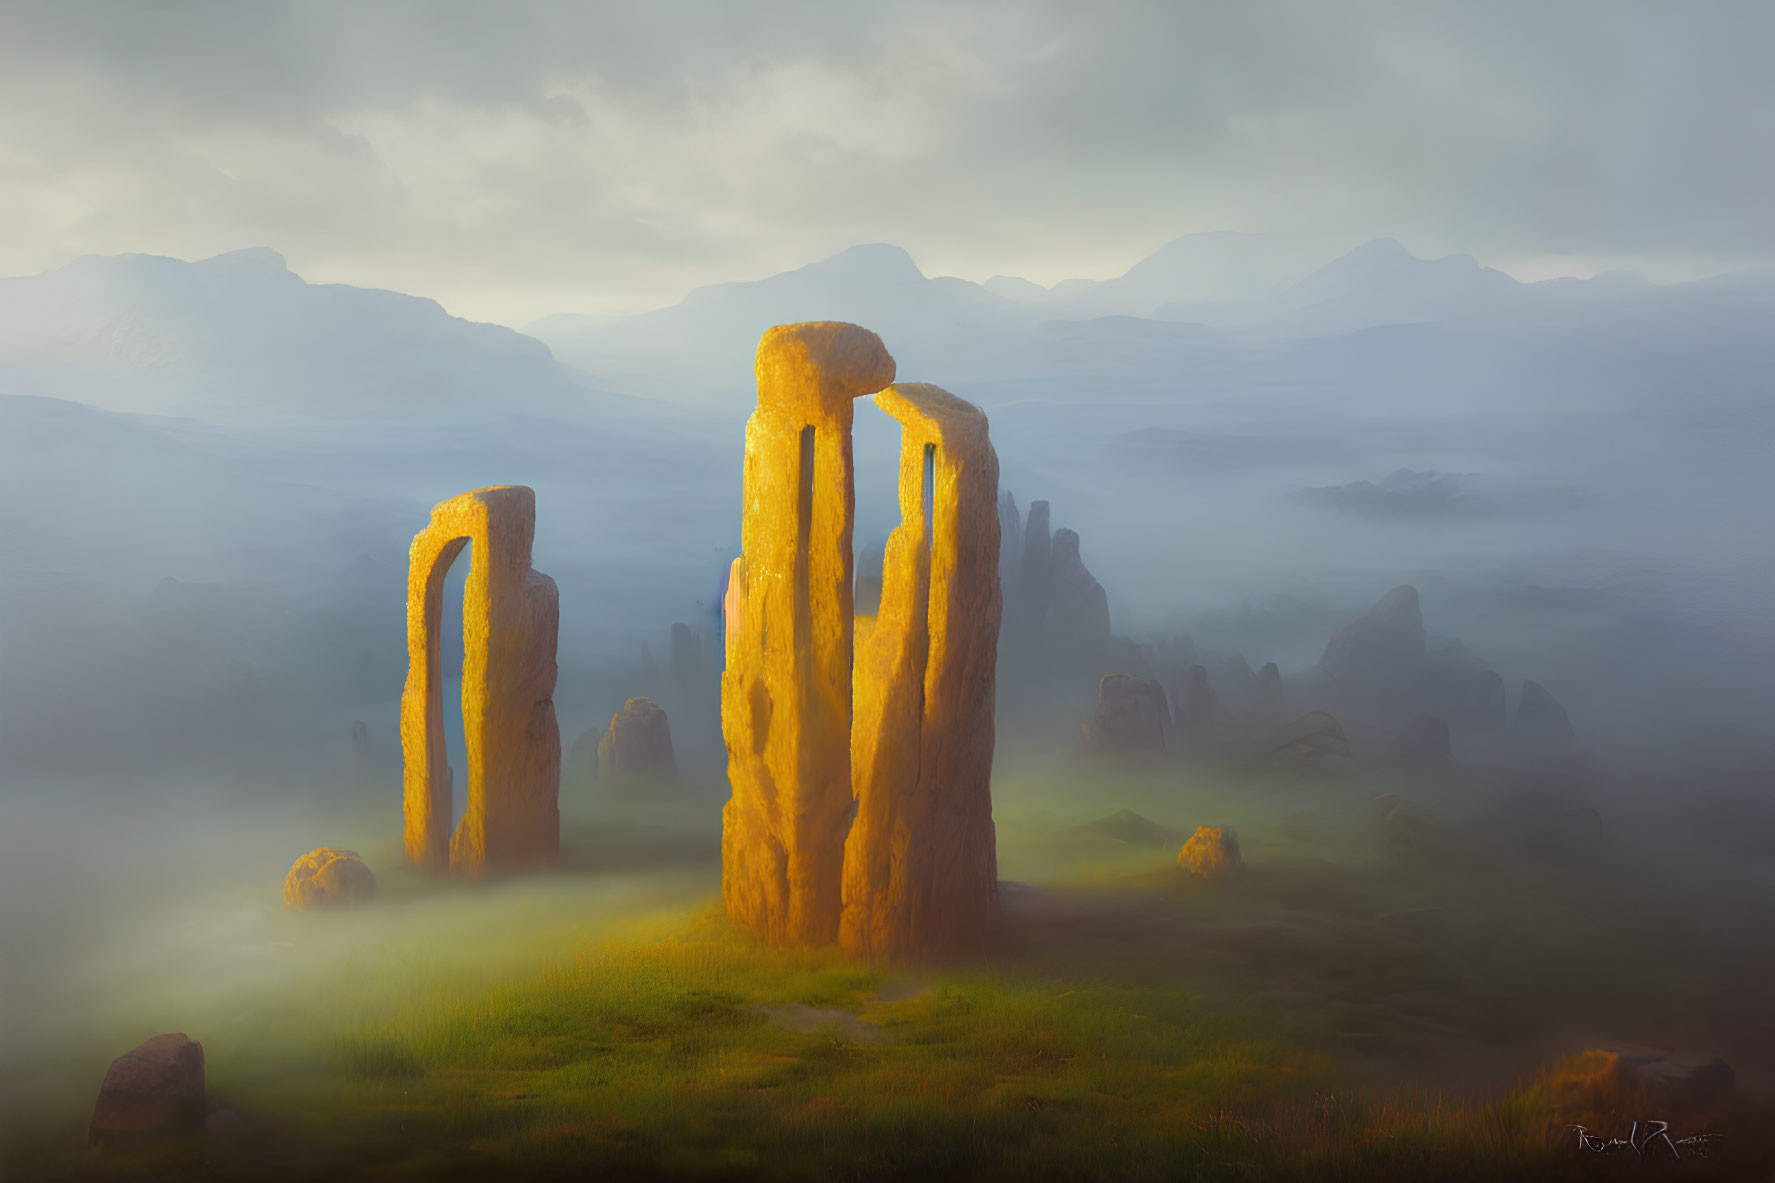 Golden Rock Formations Amid Misty Landscape and Greenery